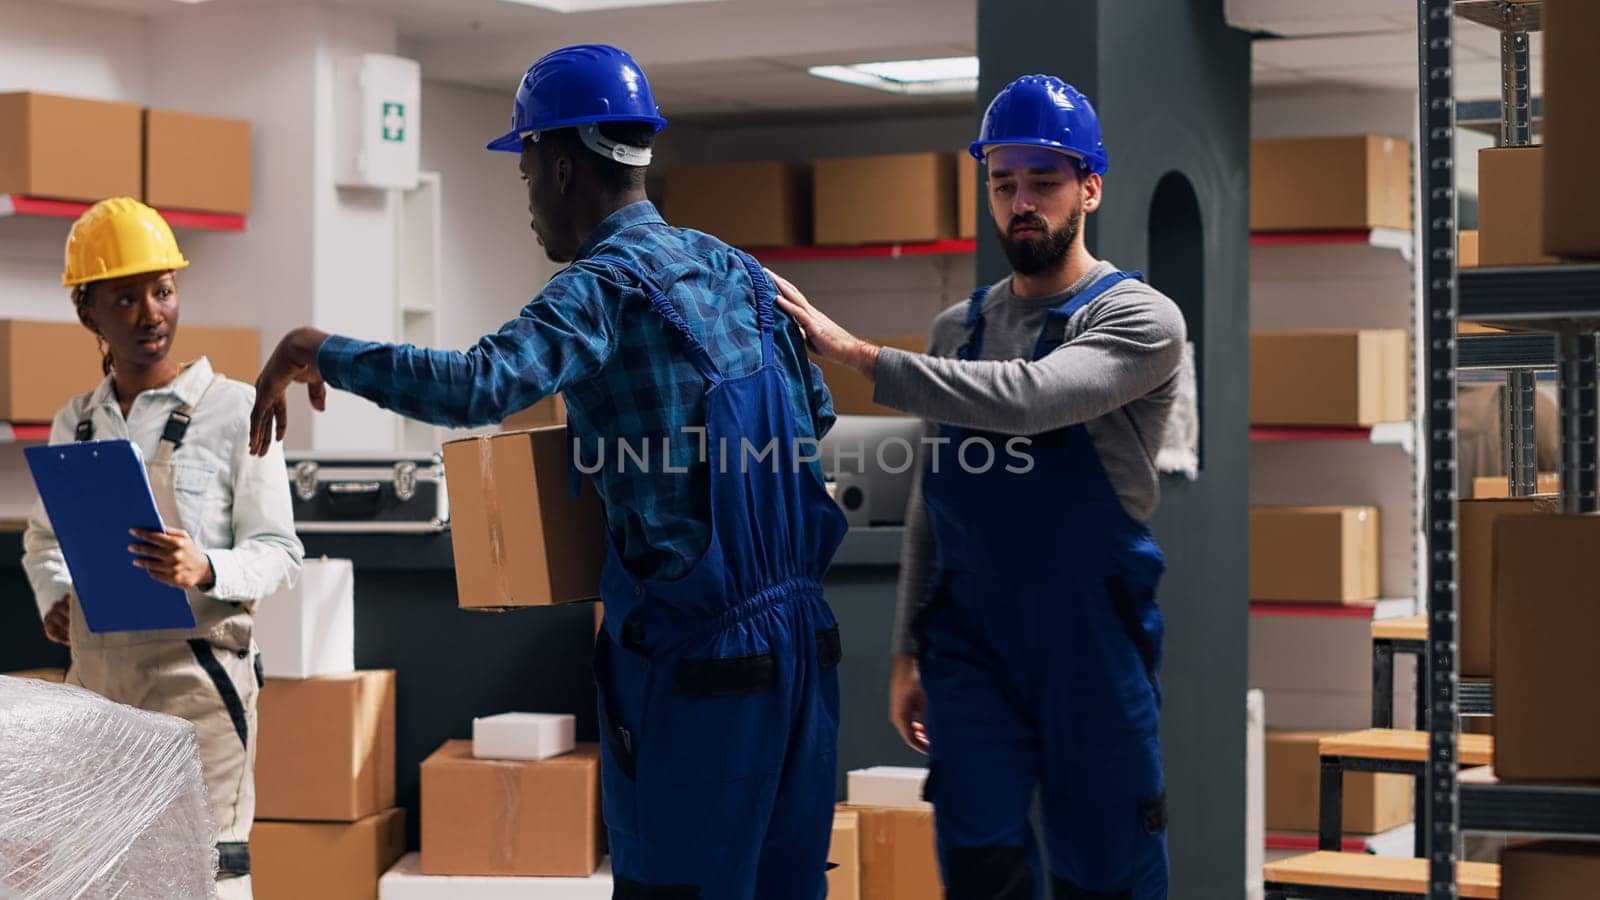 Multiethnic group of employees working with products in packages, planning shipment for goods distribution. Men and women looking at cardboard boxes filled with merchandise. Tripod shot.